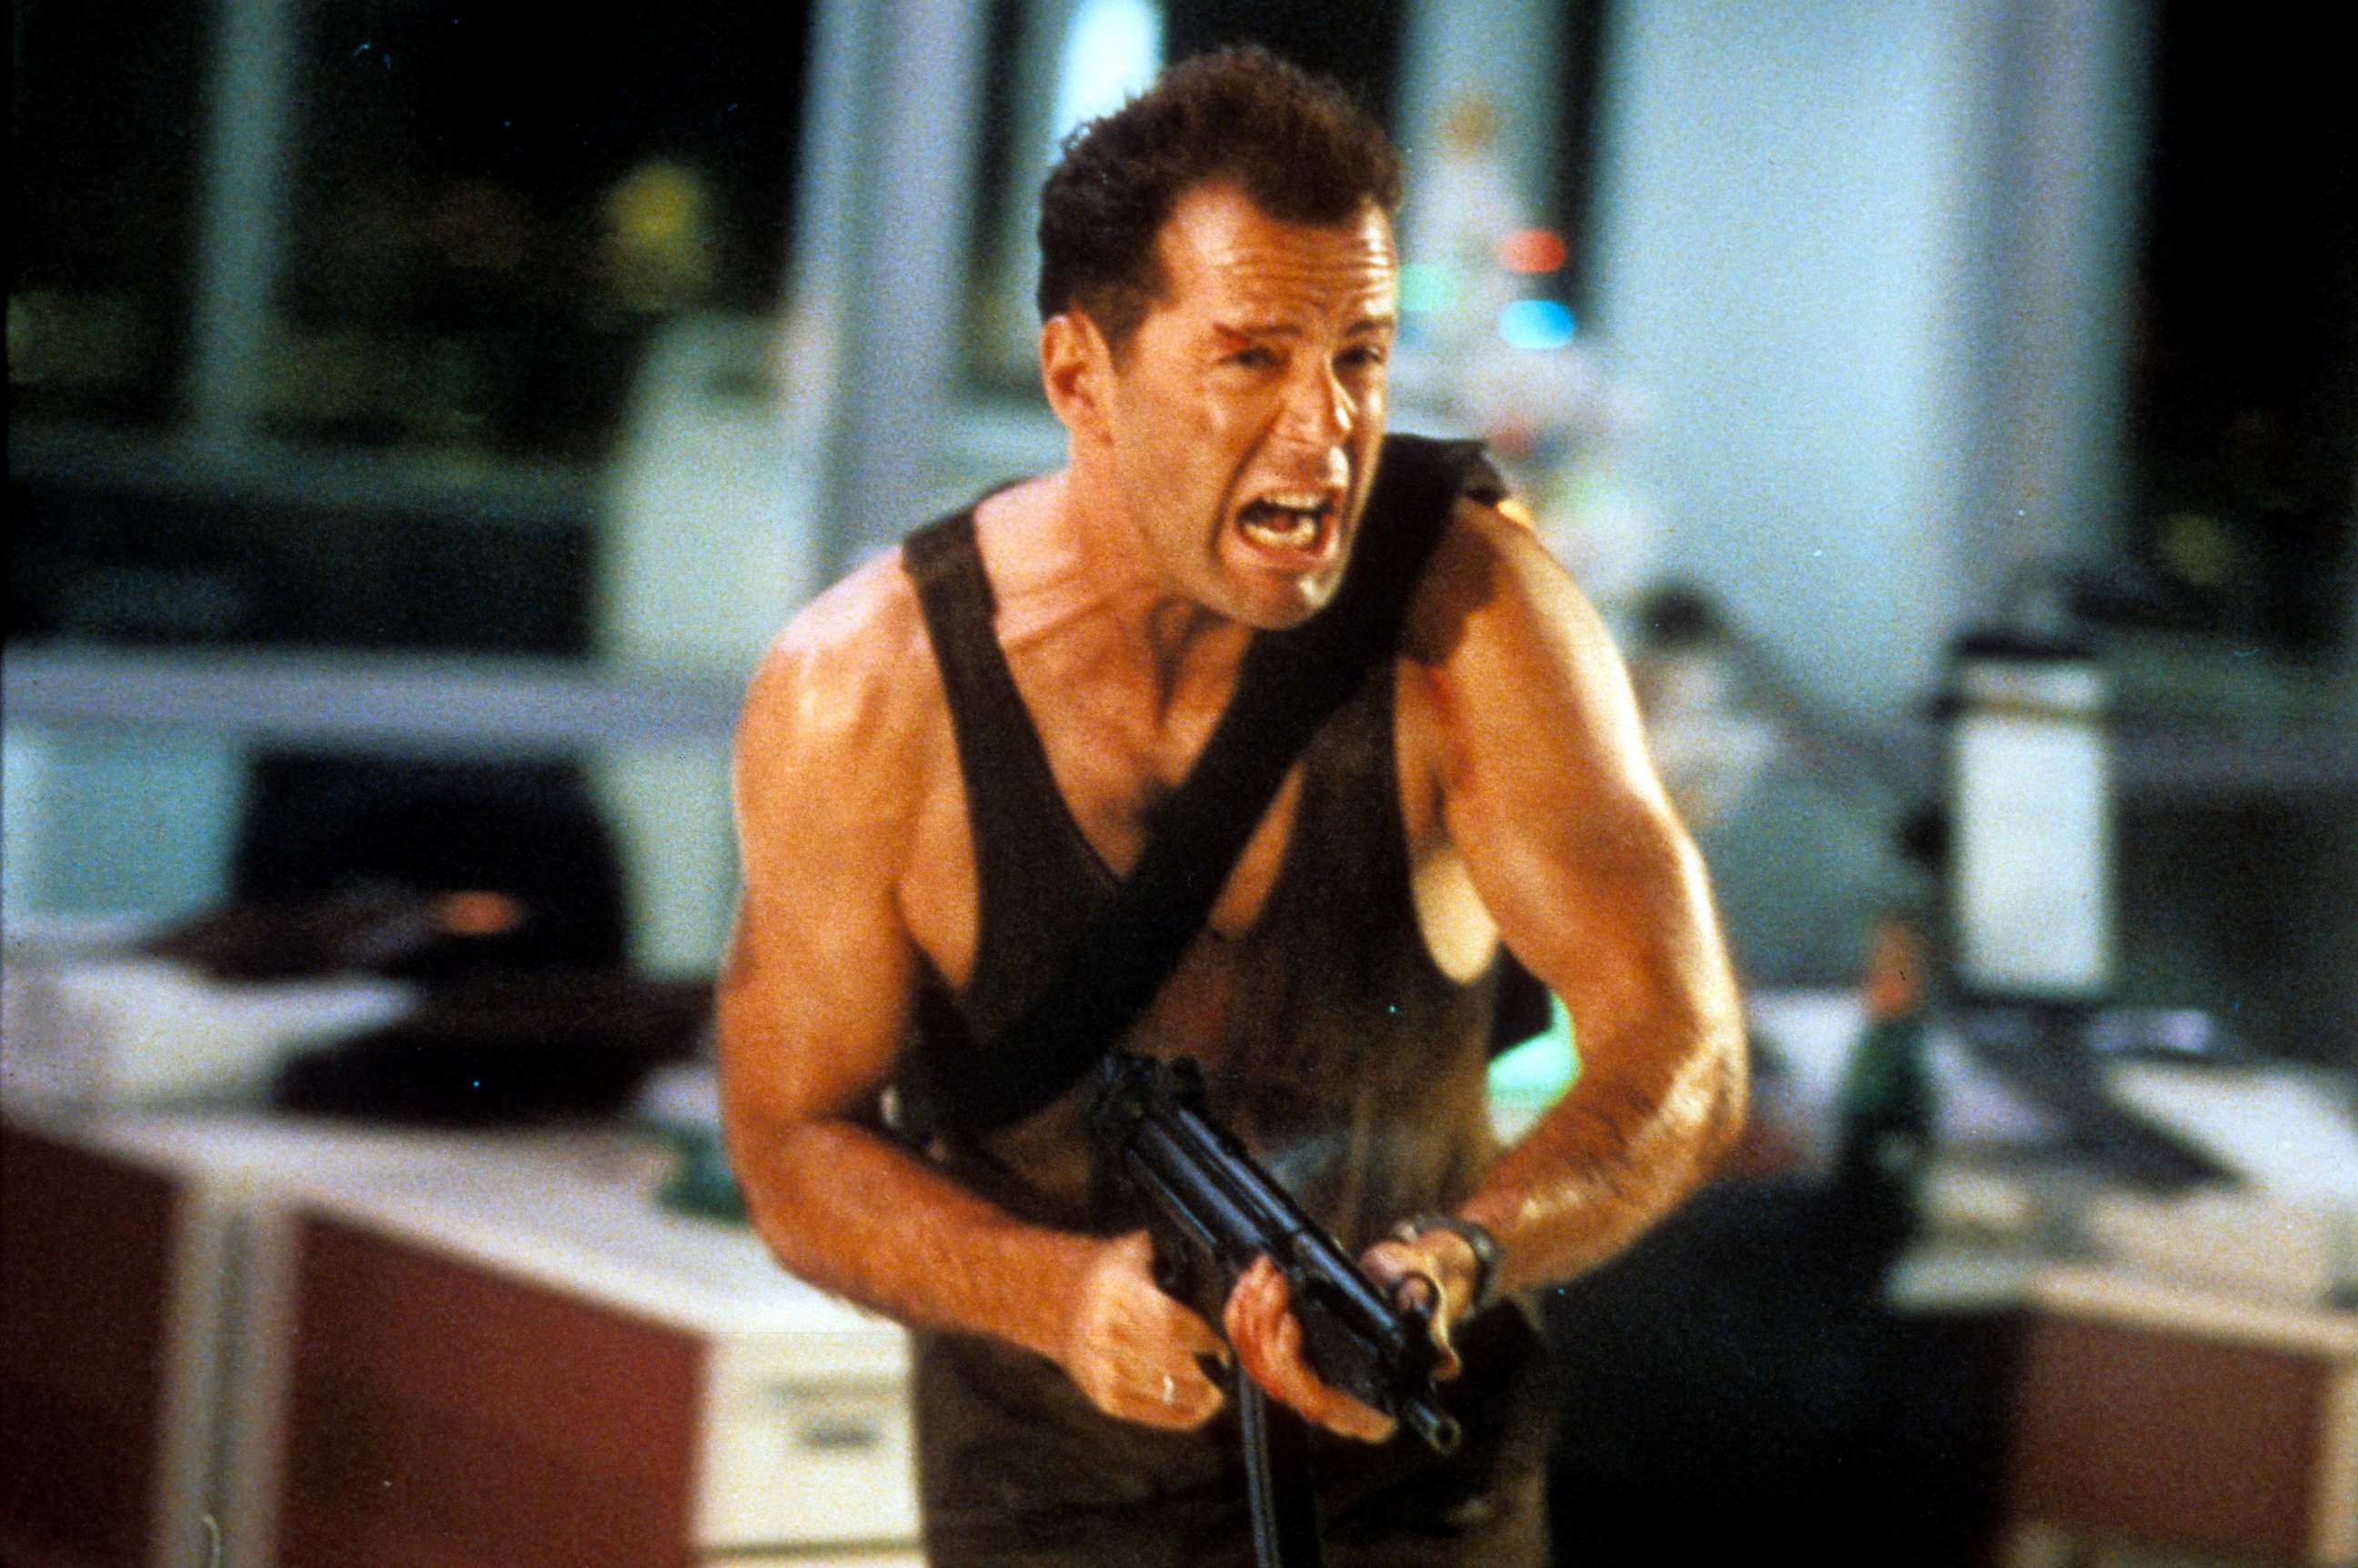 PHOTO: Bruce Willis in a scene from the film 'Die Hard', 1988.